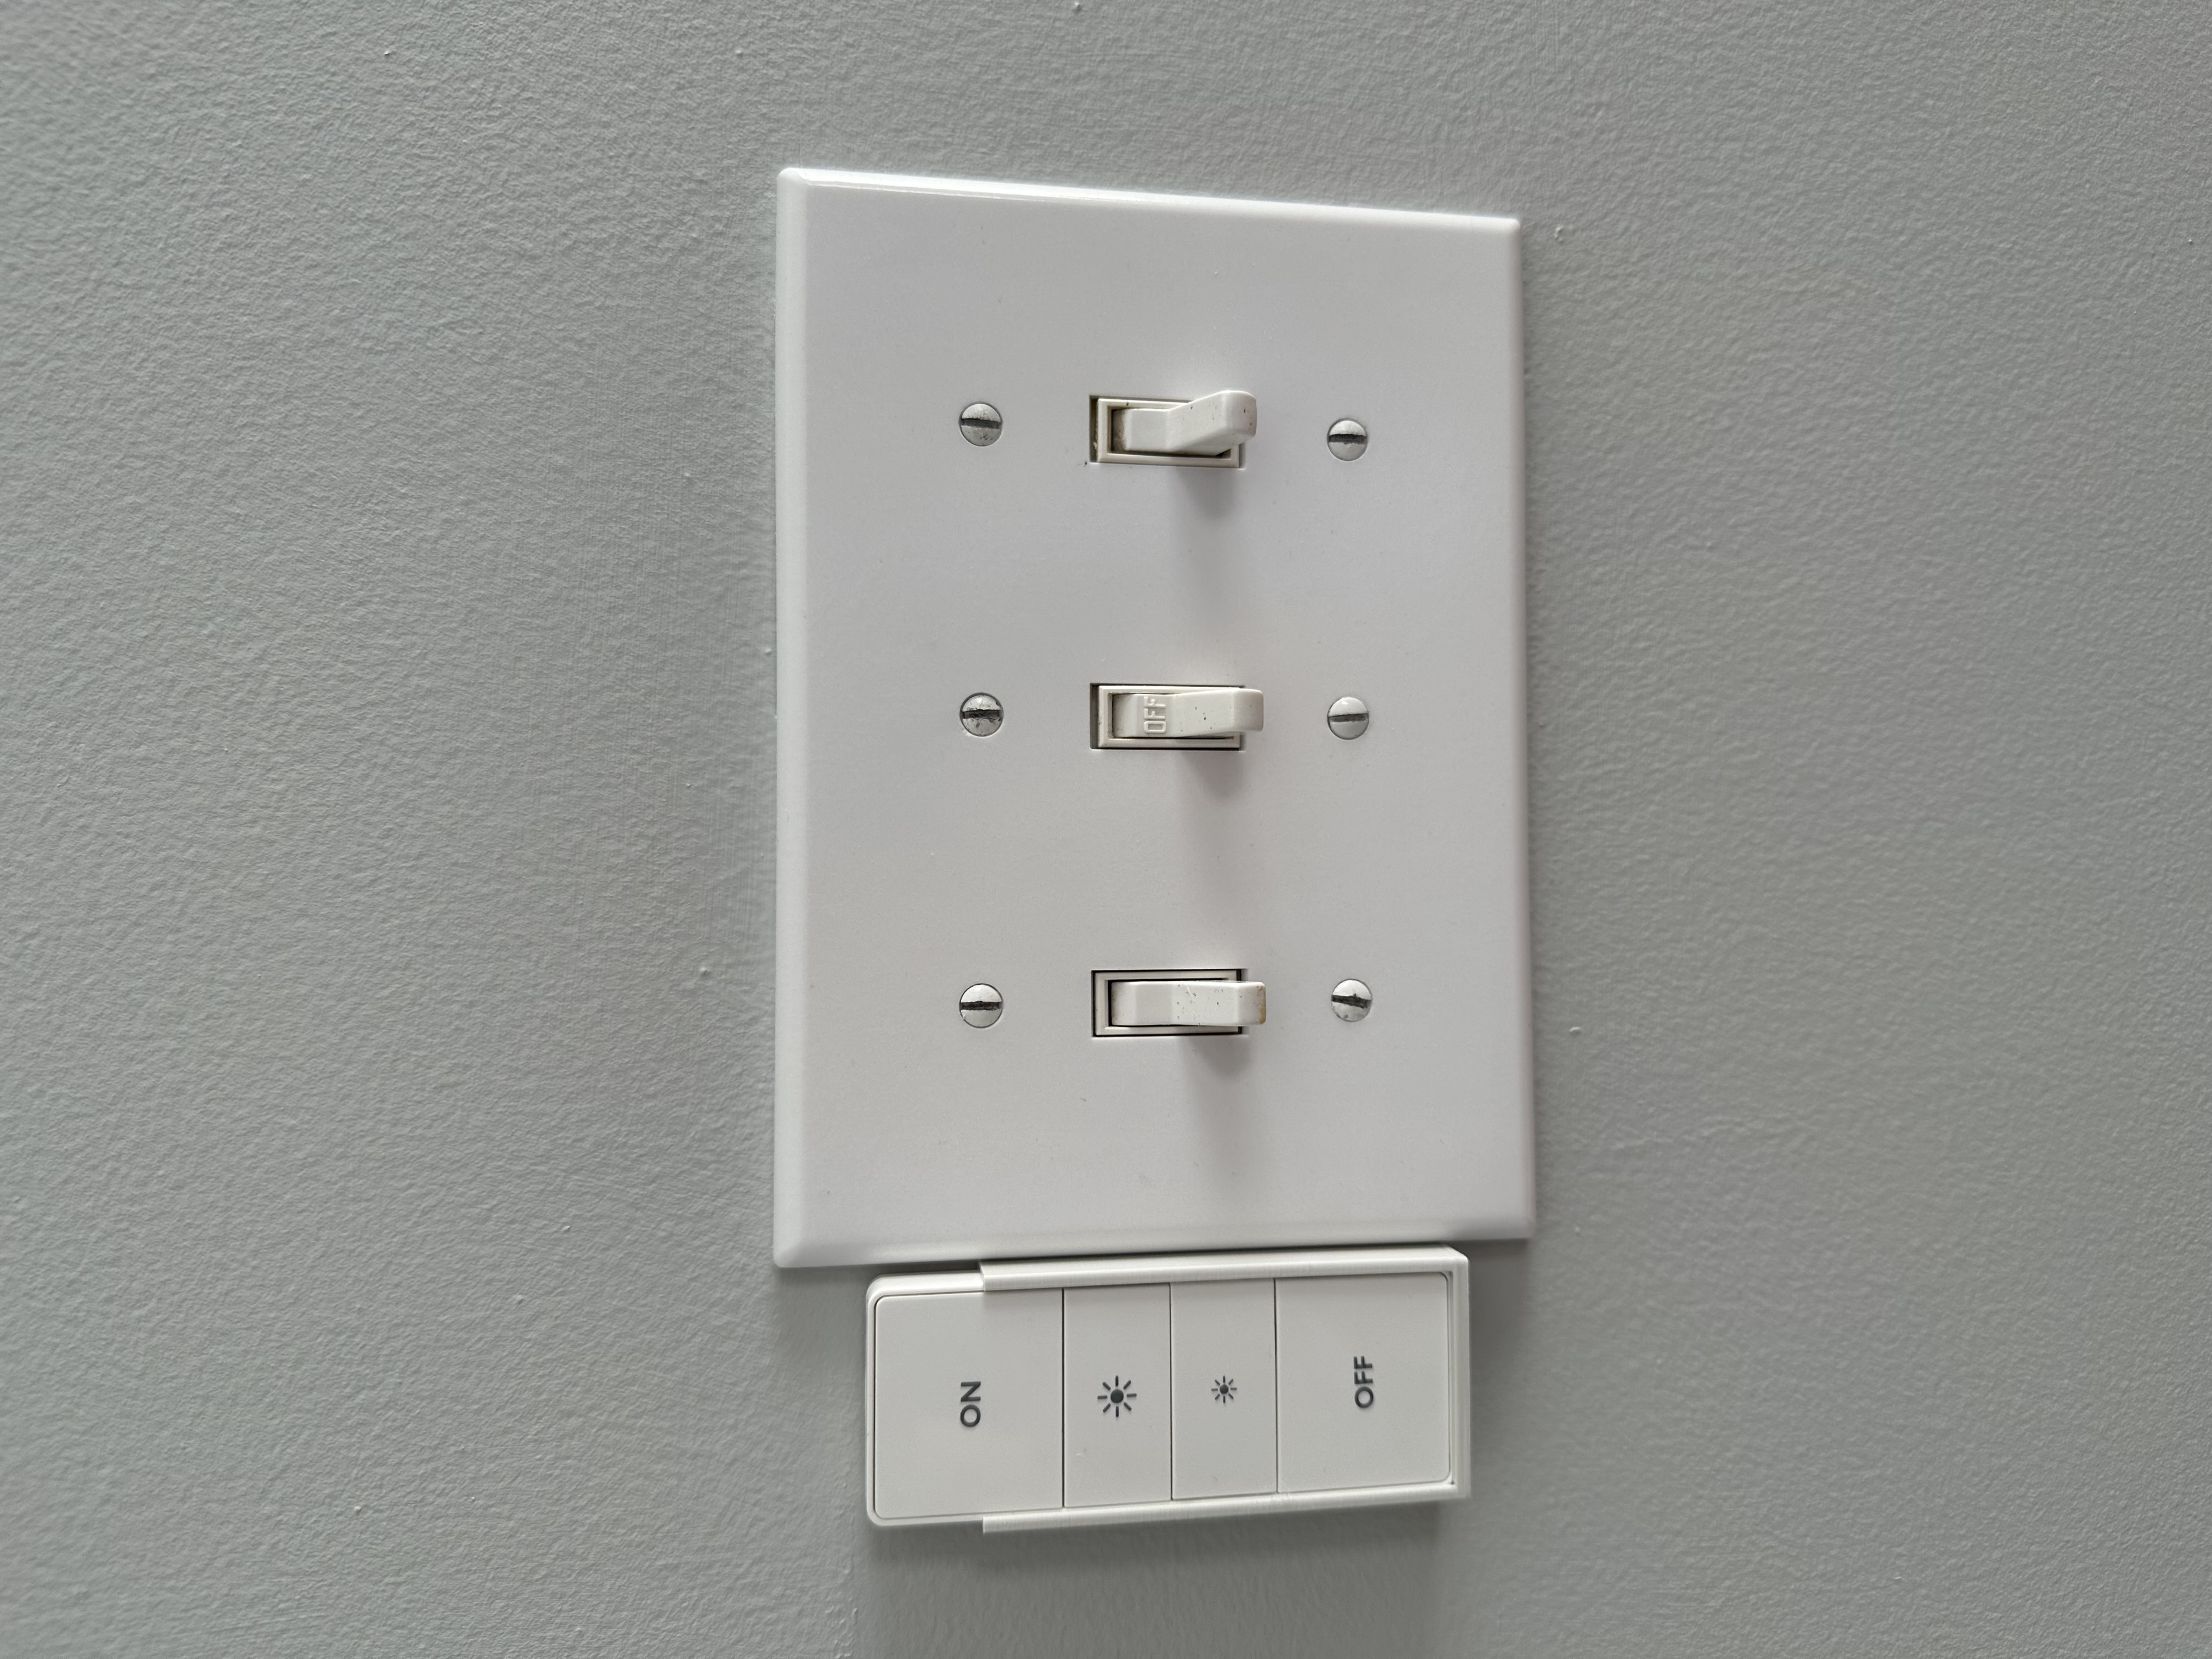 Philips Hue Dimmer Switch Cover Mount